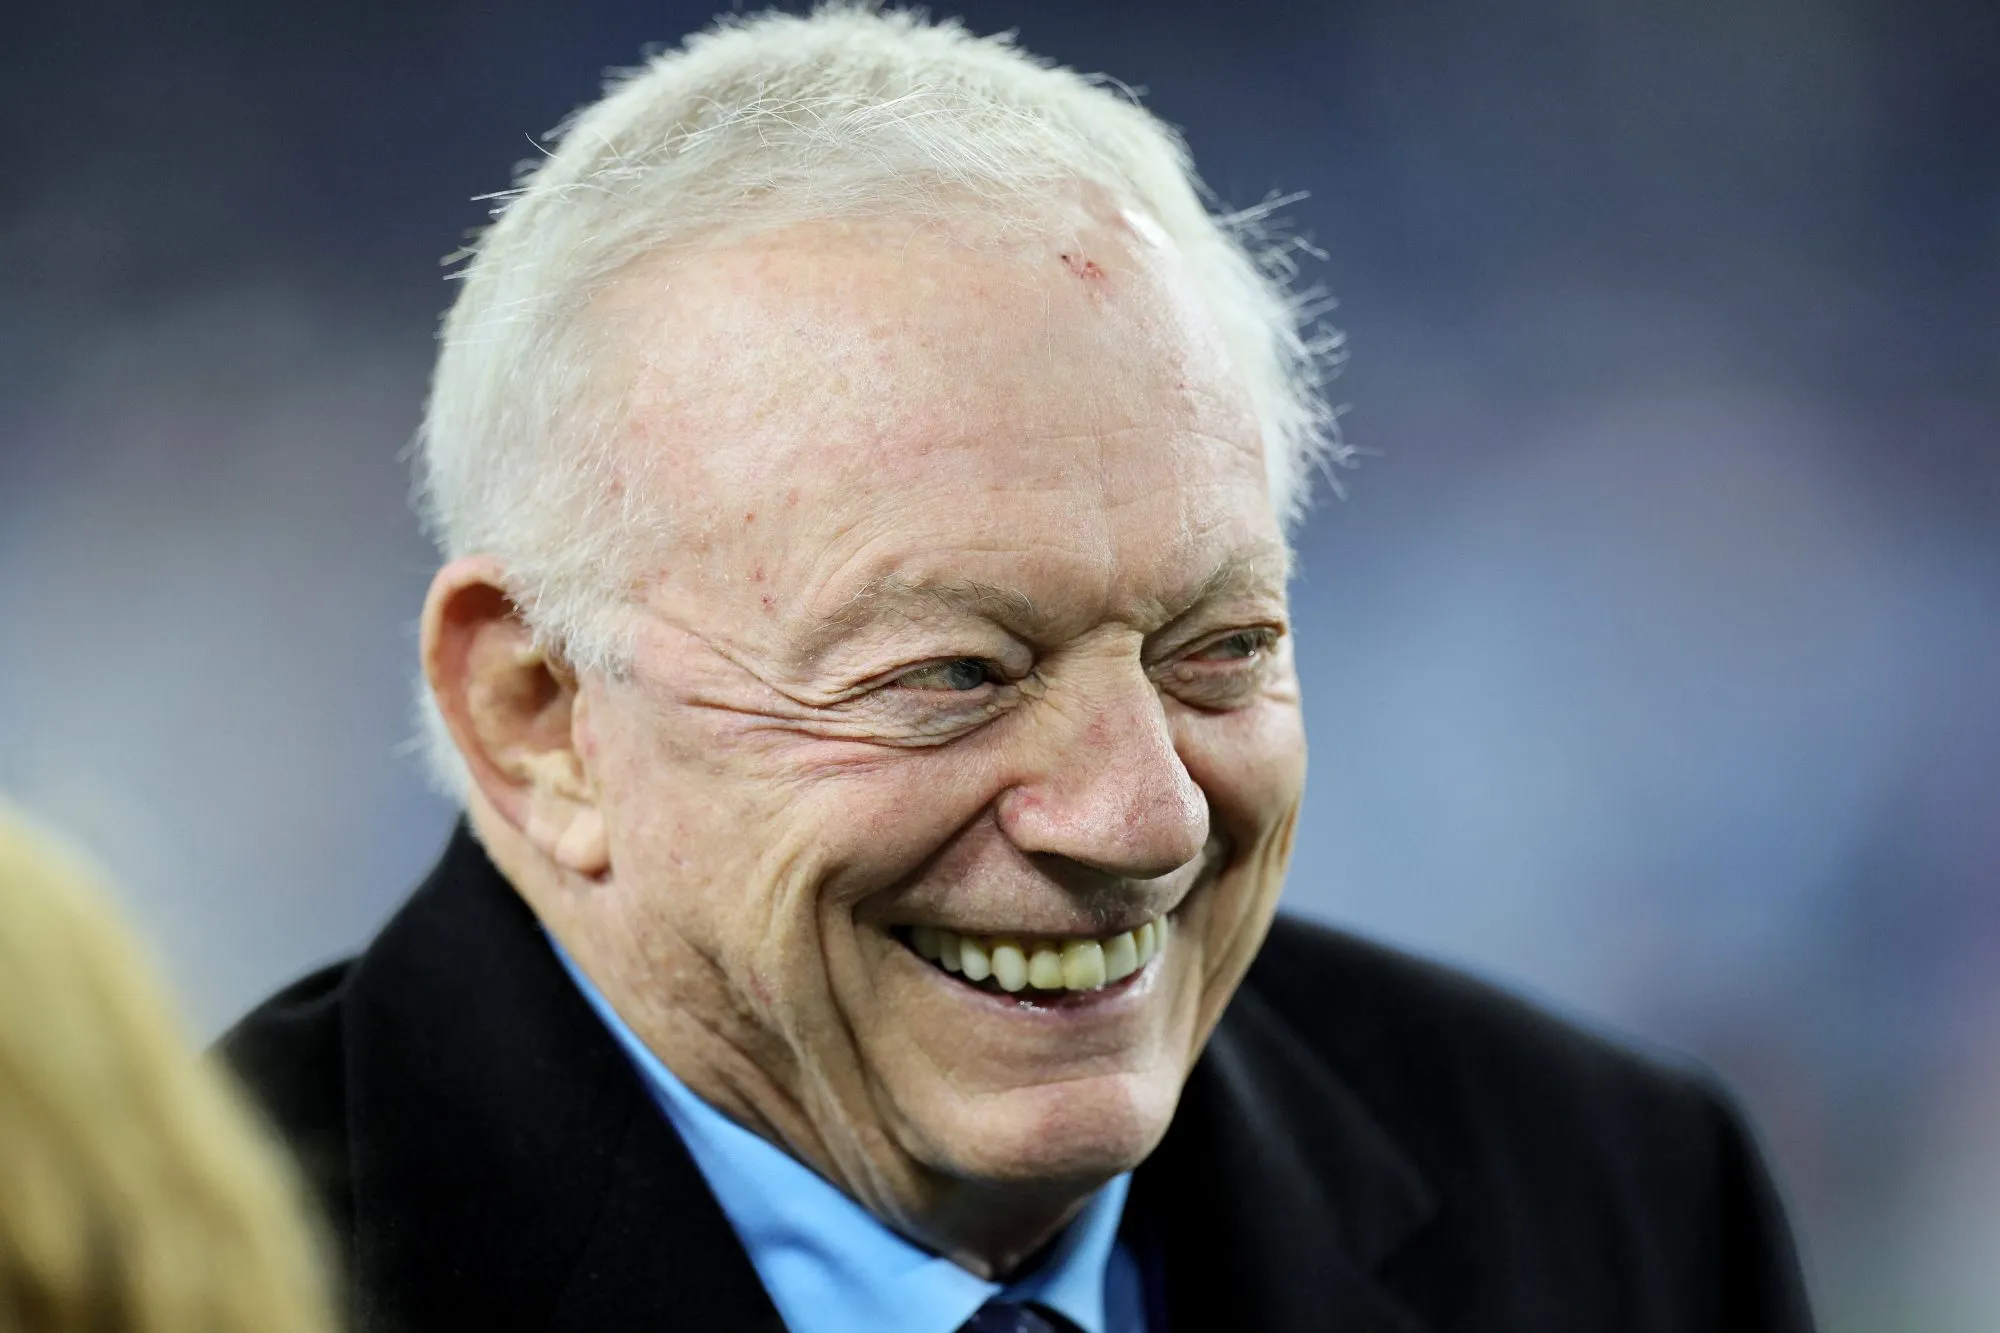 Jerry Jones discusses his business endeavor openly in light of the NFL’s growth